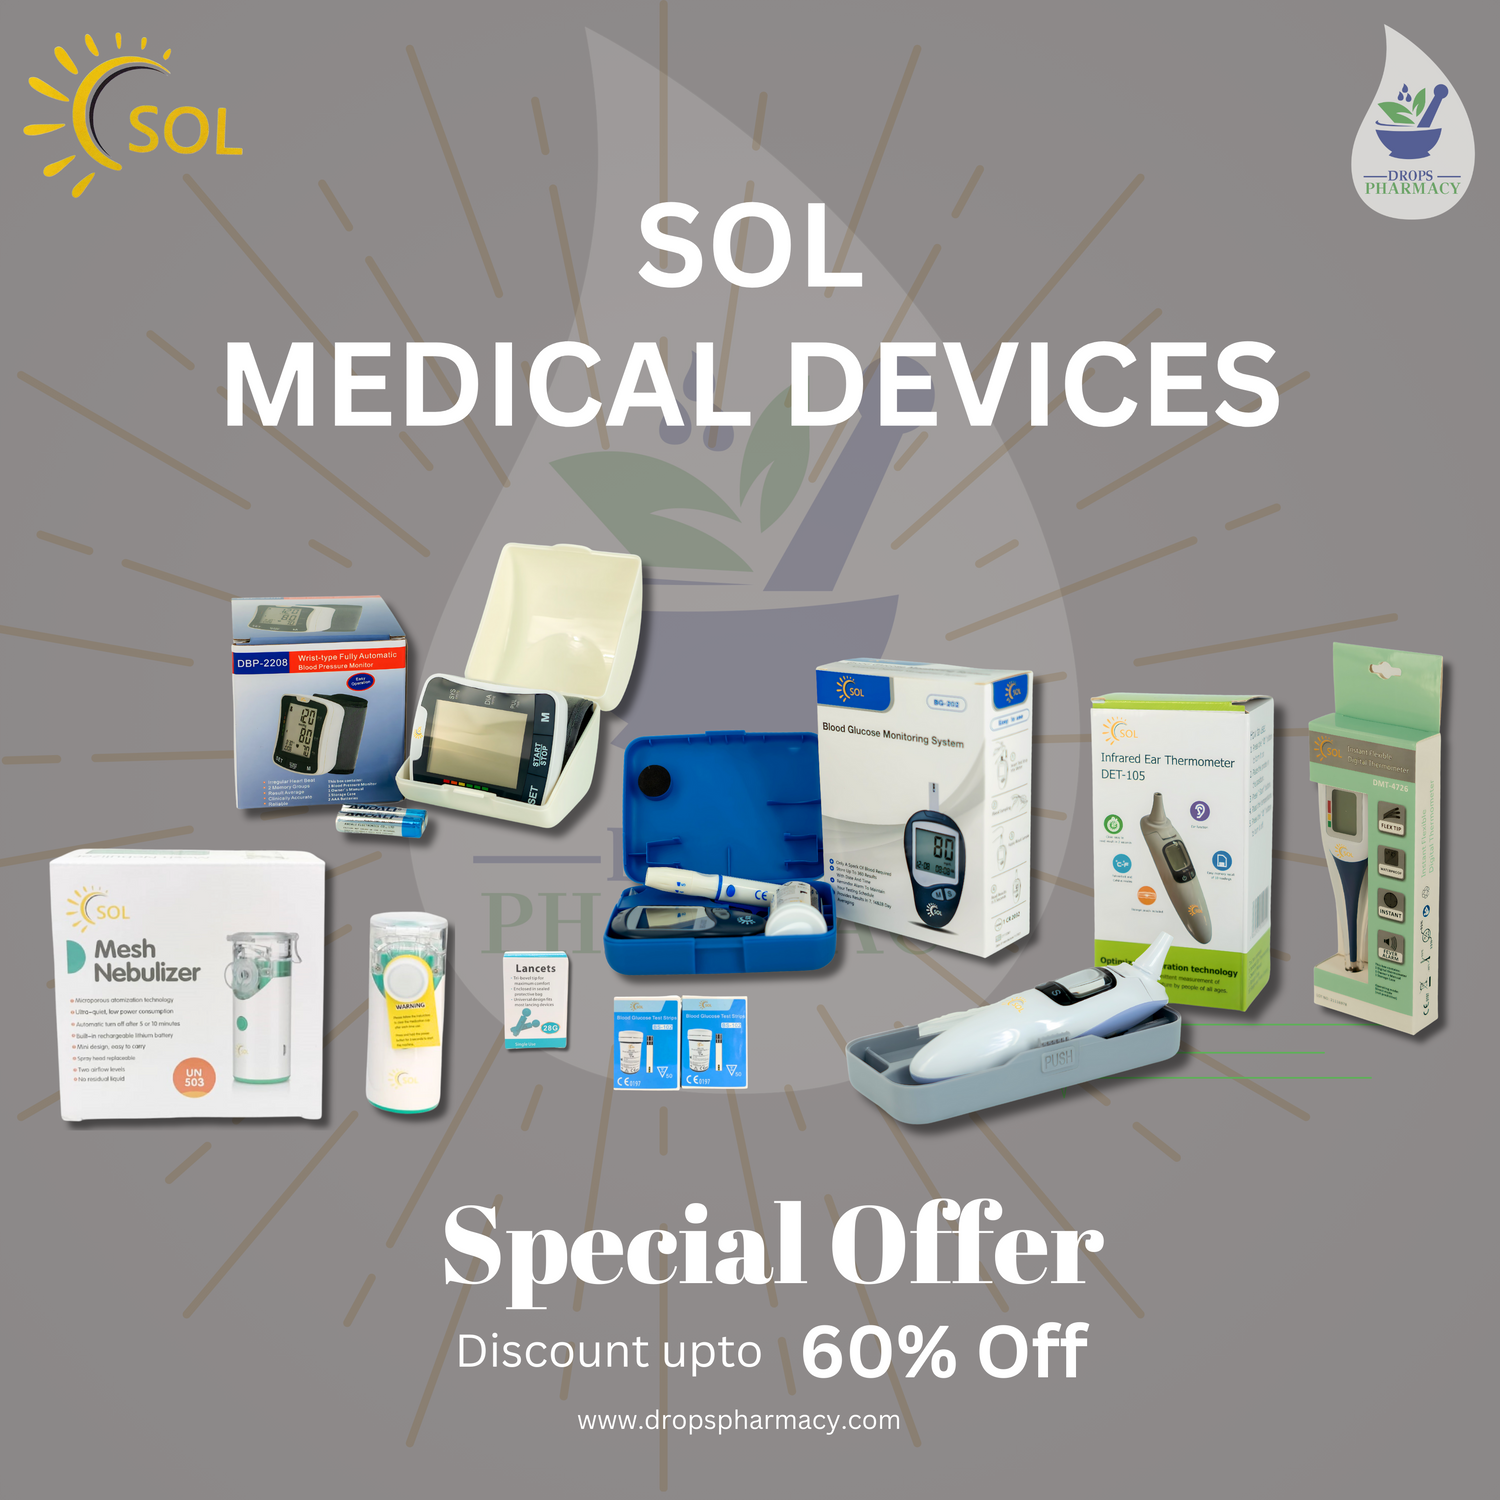 SOL MEDICAL DEVICES